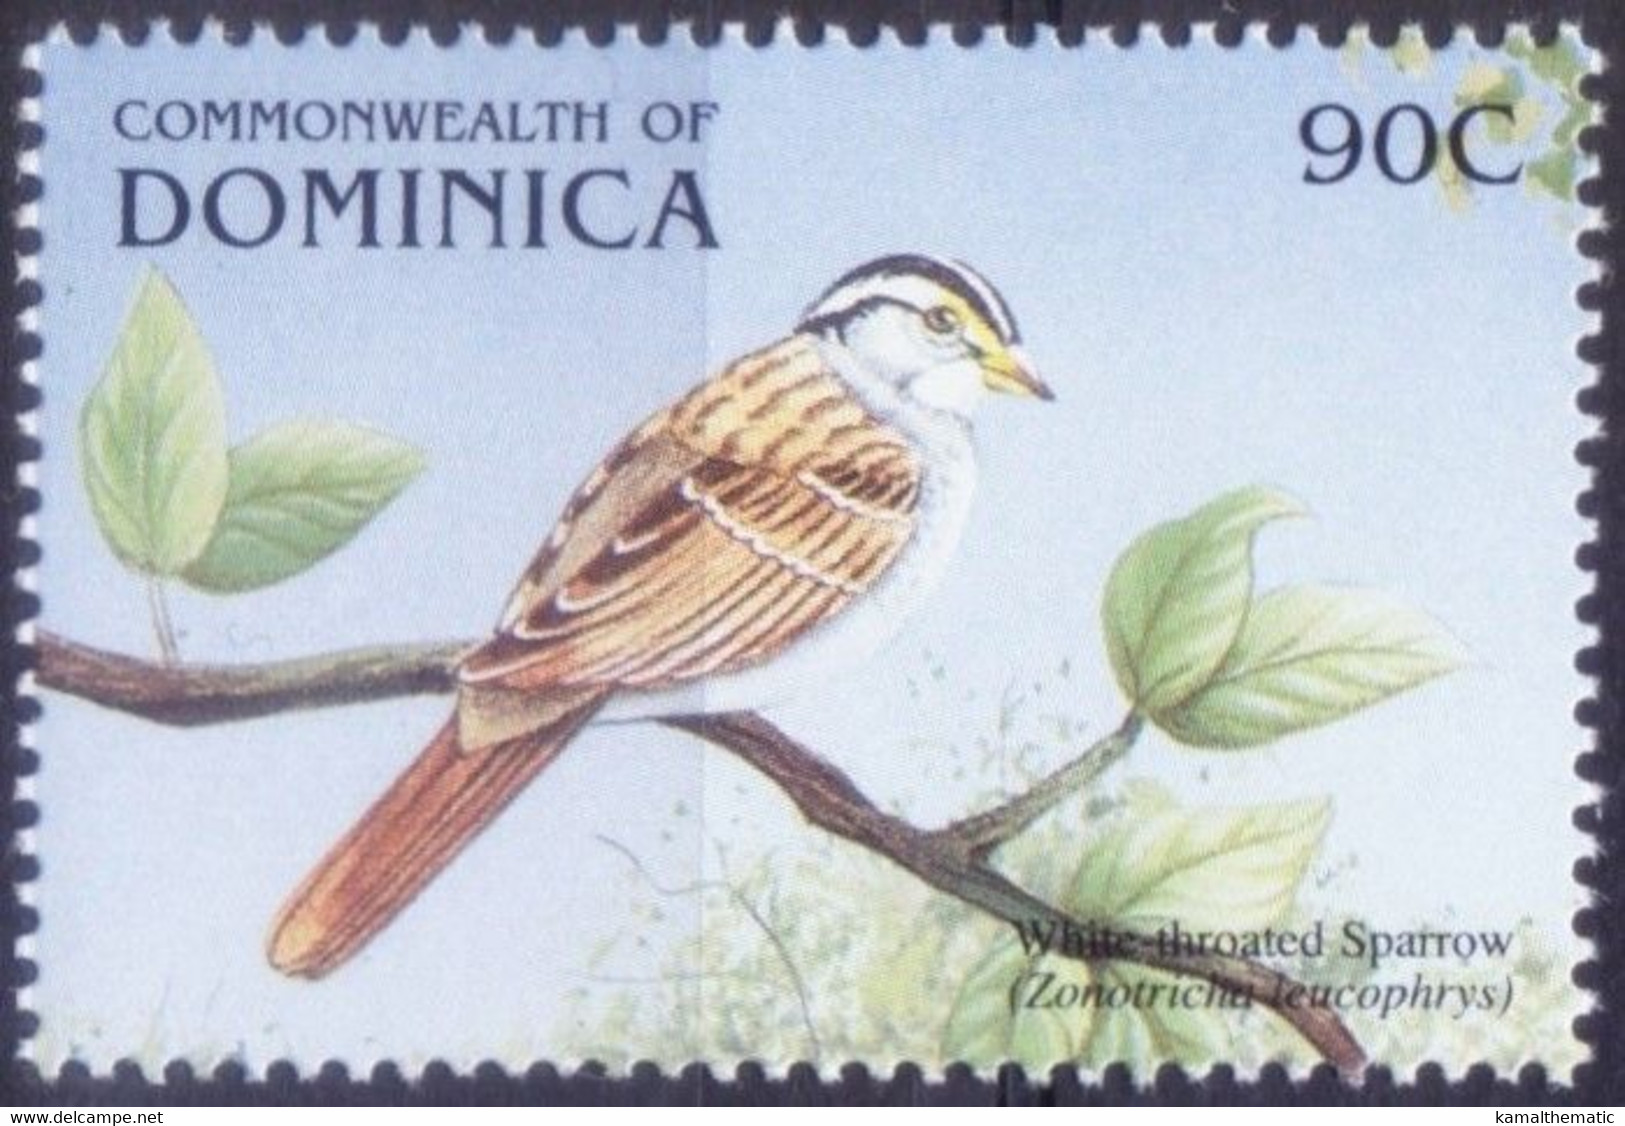 White-throated Sparrow, Birds, Dominica 1999 MNH - Mussen